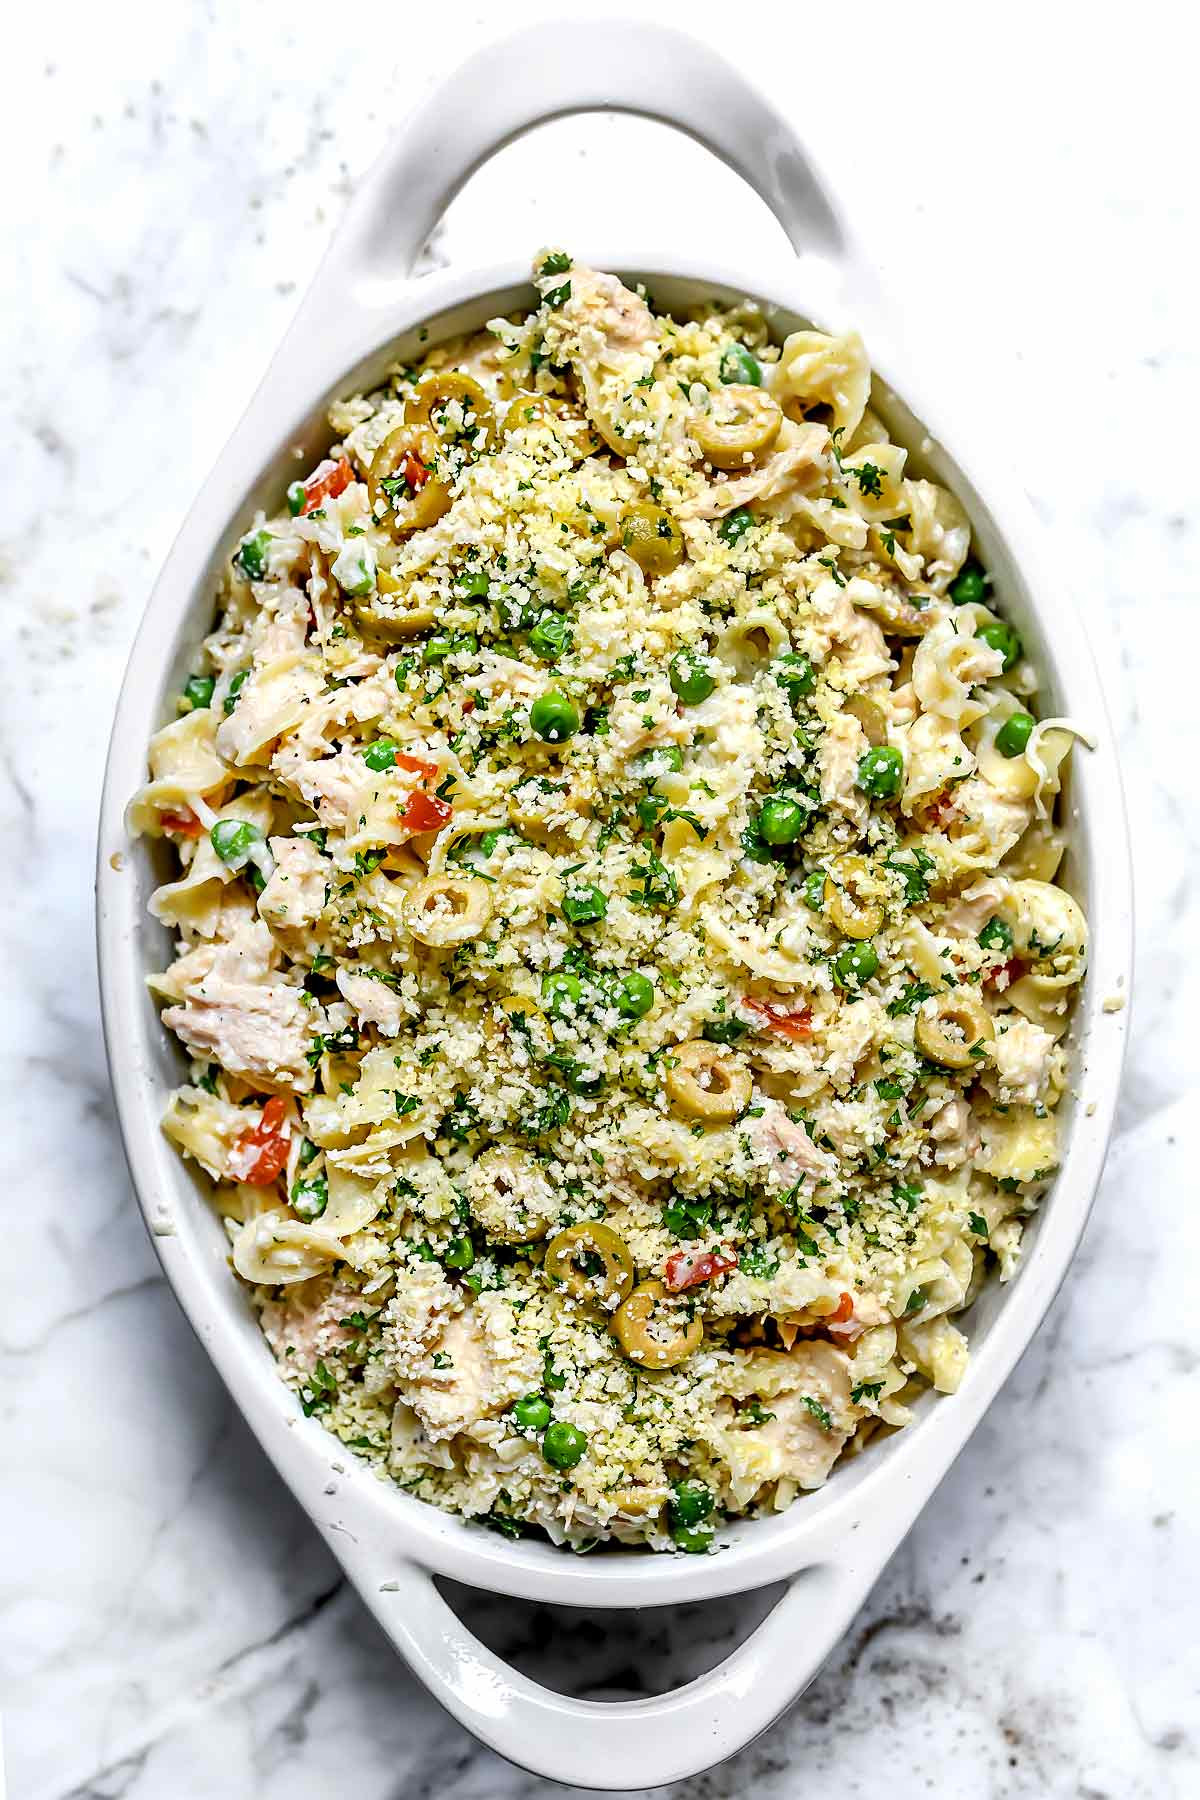 Tuna Noodle Casserole From Scratch
 The BEST Tuna Noodle Casserole from Scratch e Dish Kitchen